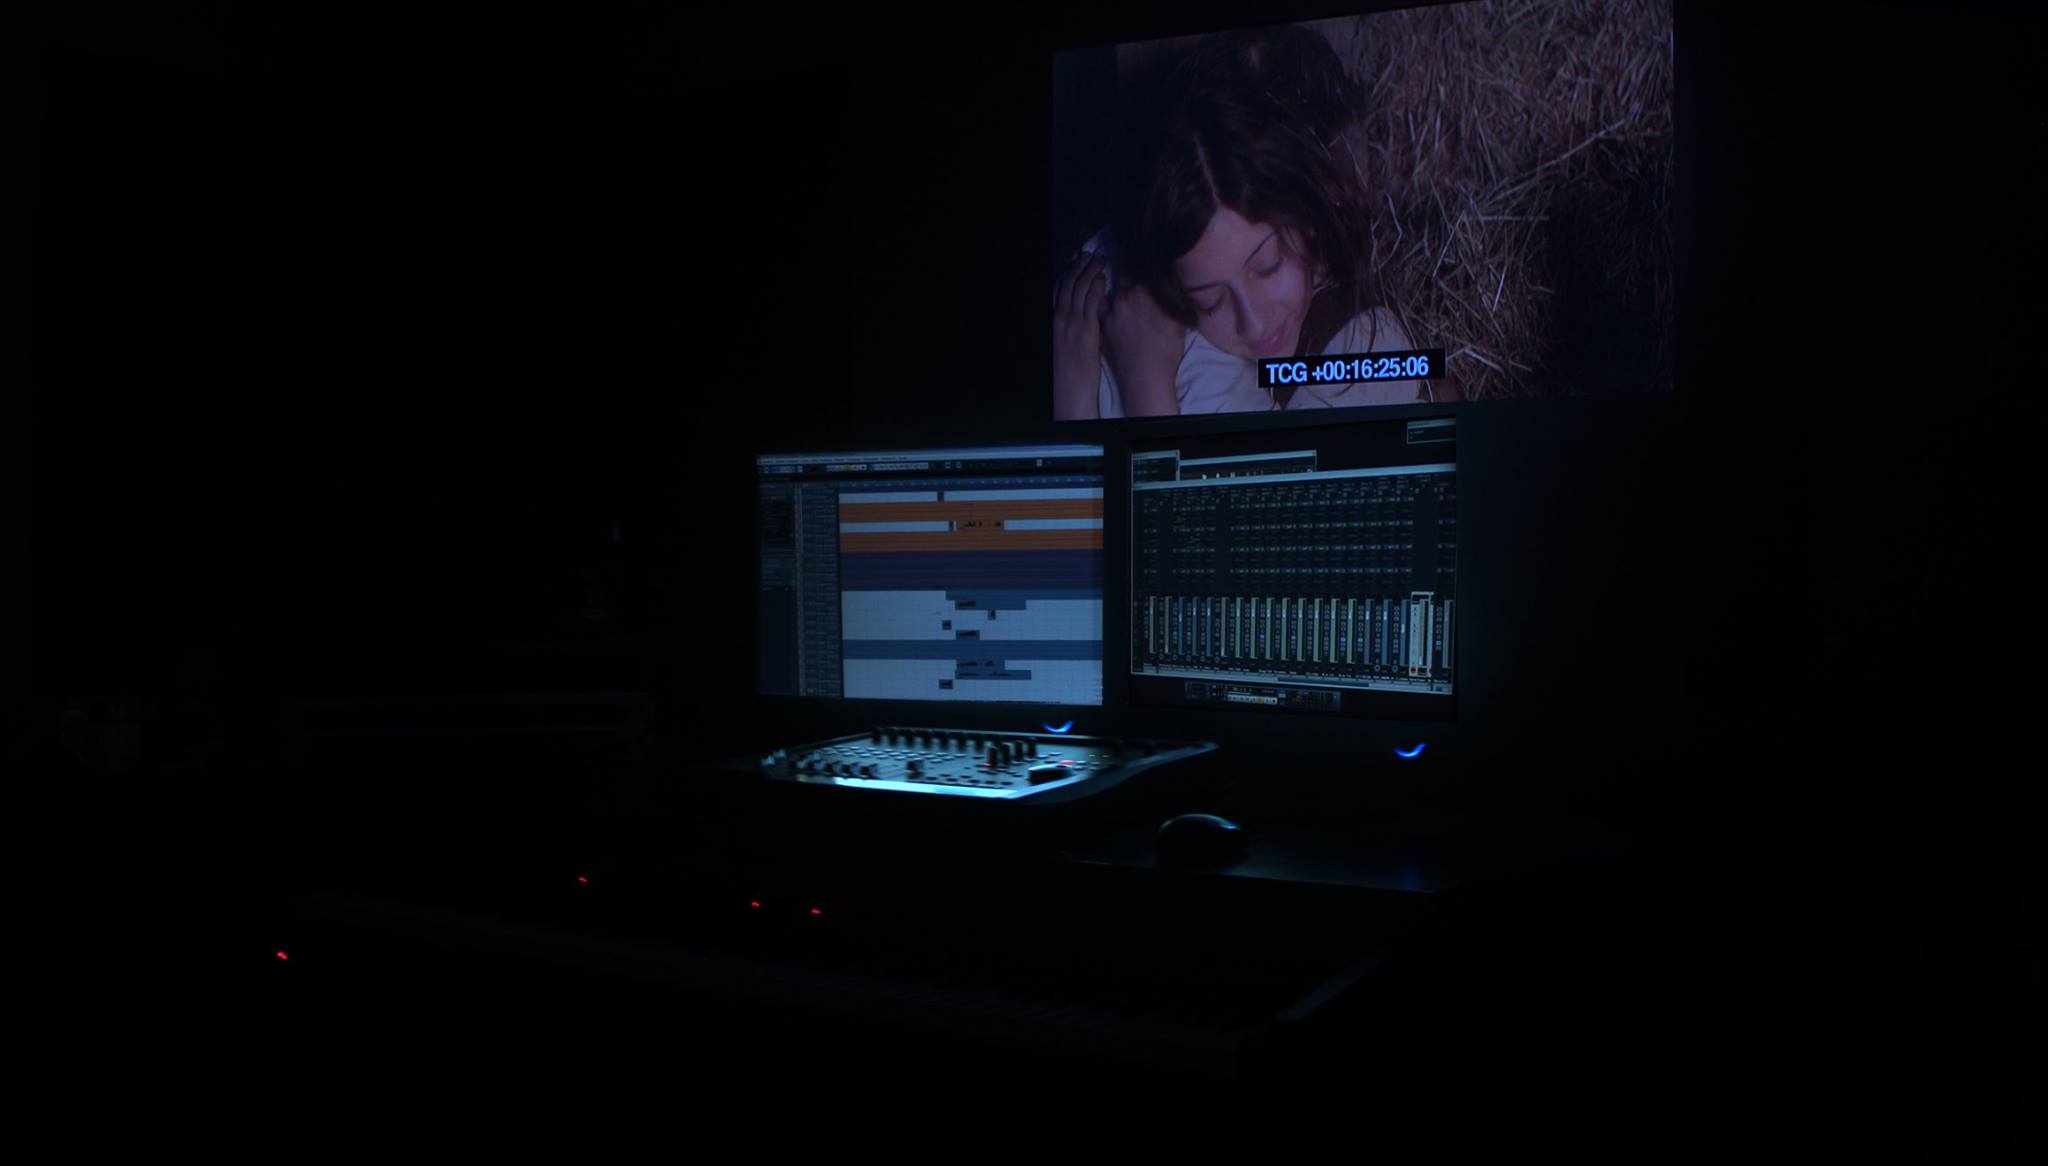 Scoring the film ¨If The Trees Could Talk¨